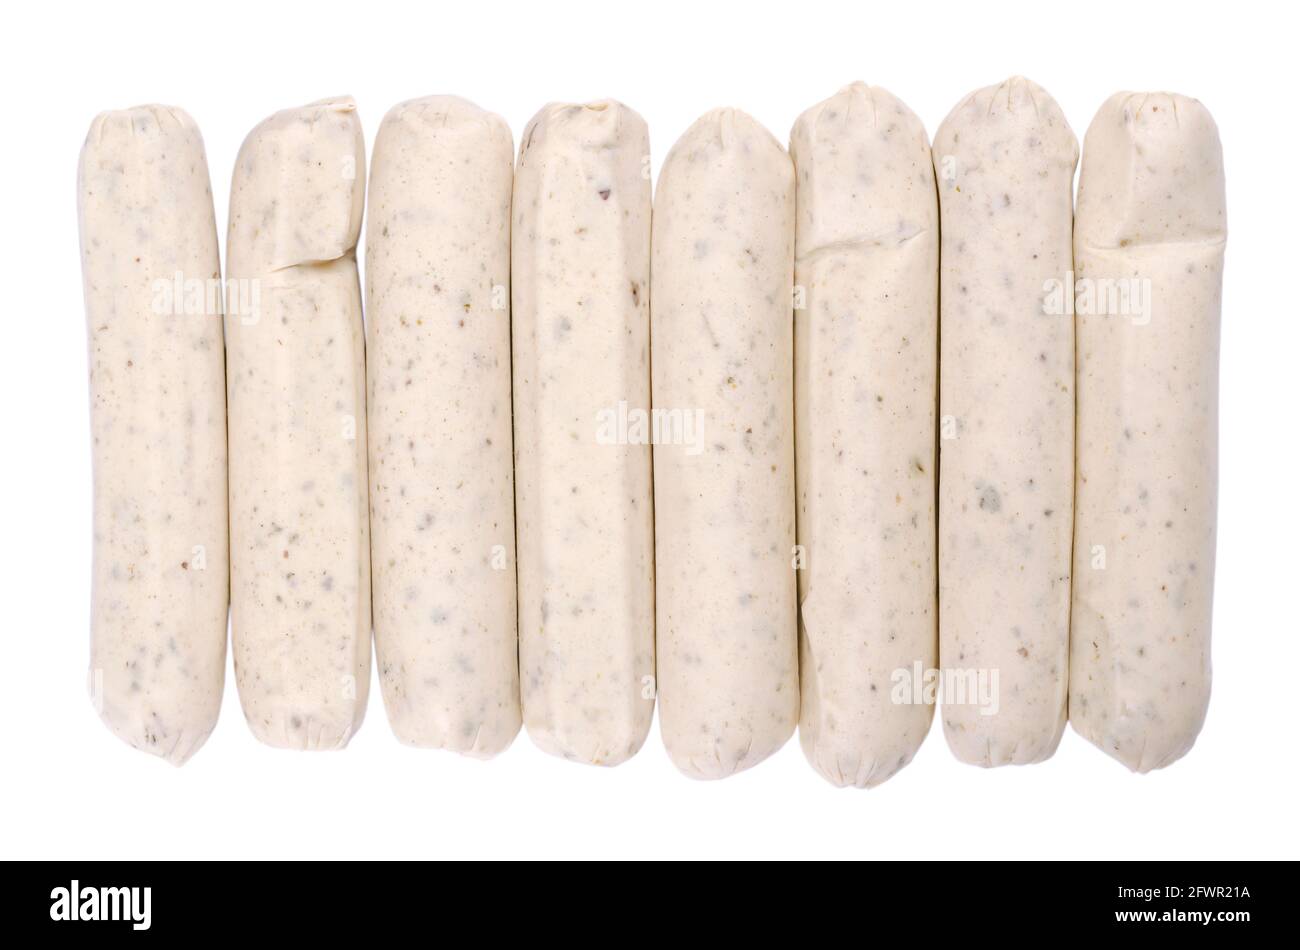 Vegetarian barbecue sausages, in a row, from above, isolated, over white. Meatless white sausages made from egg and milk protein as a meat substitute. Stock Photo